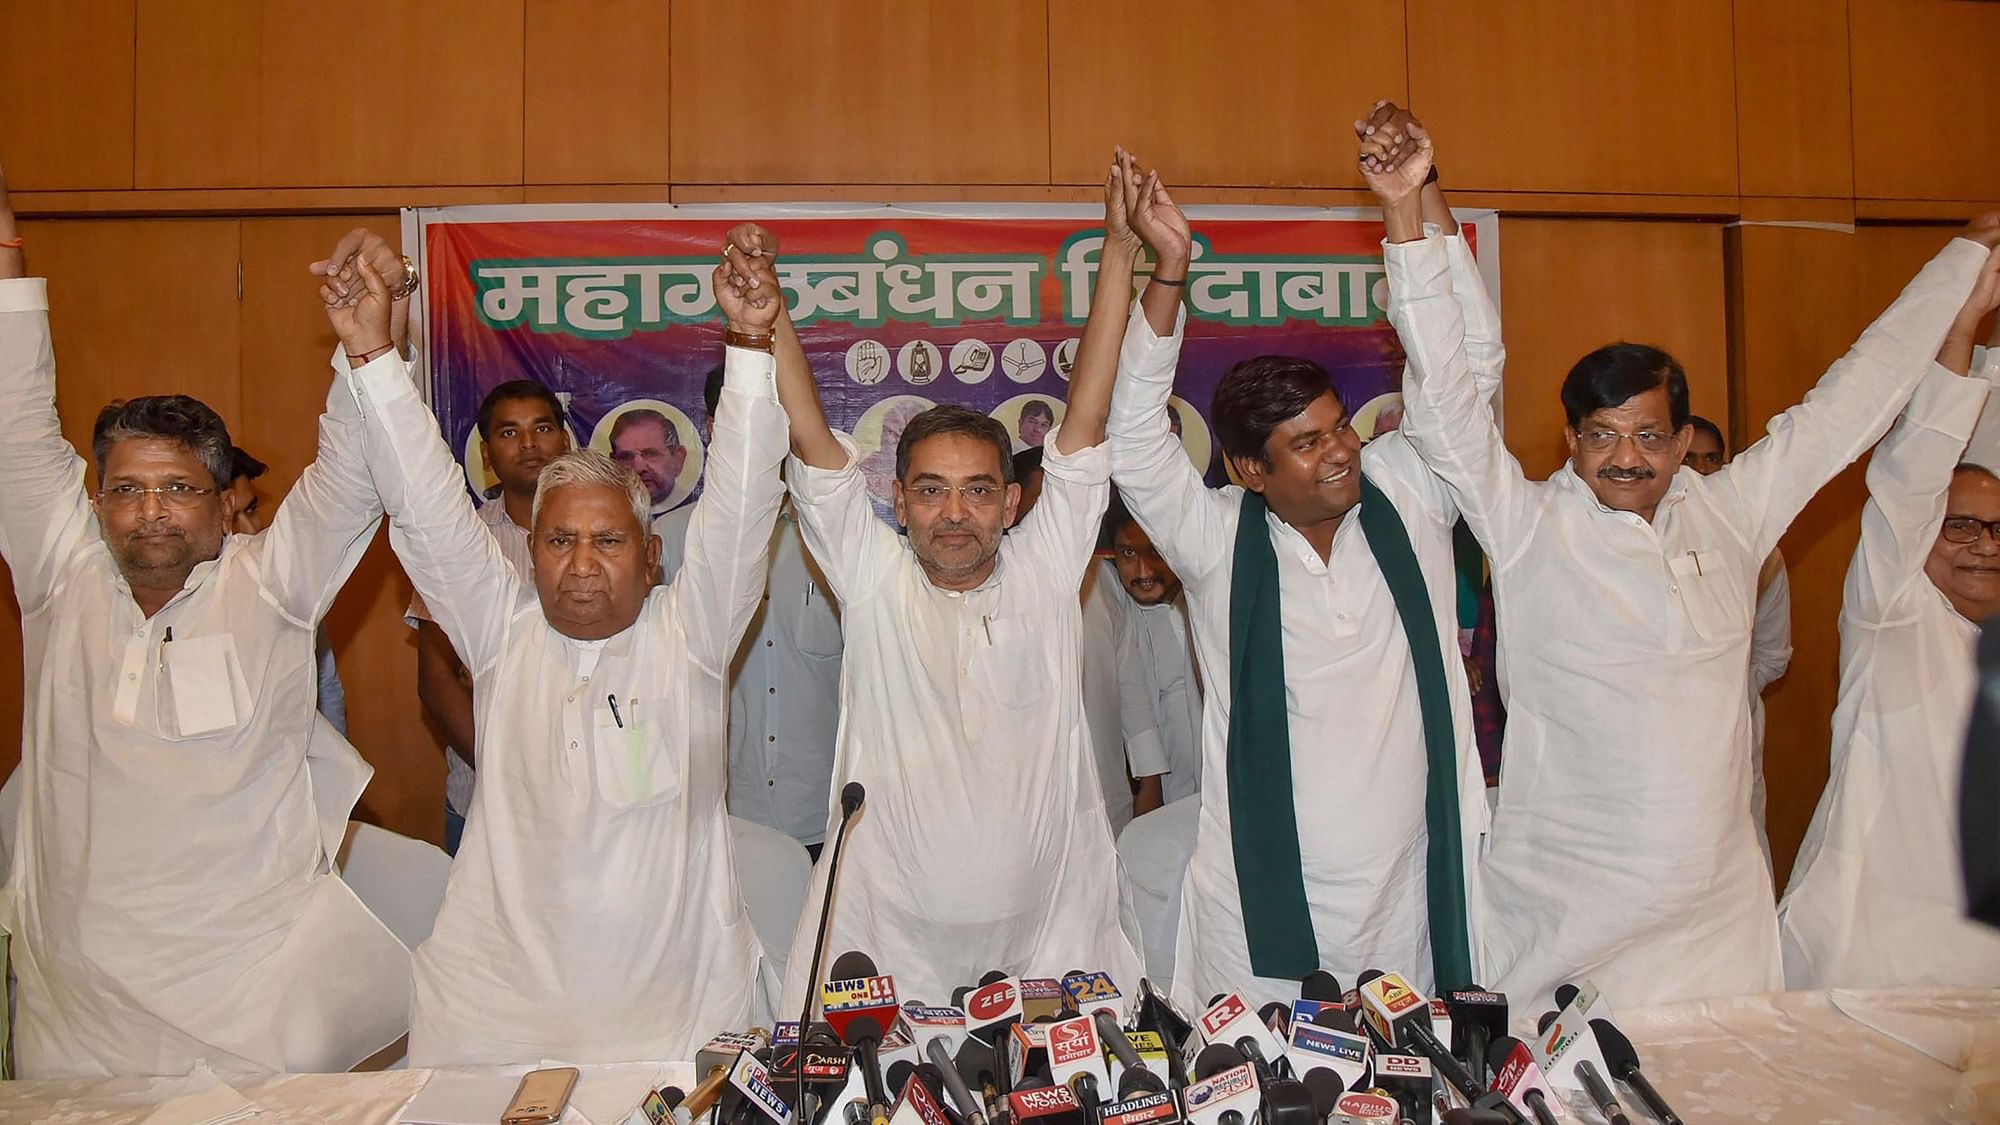 RLSP’s Upendra Kushwaha, RJD’s Ram Chandra Purve, VIP’s Mukesh Sahani and others during a press conference in Patna.